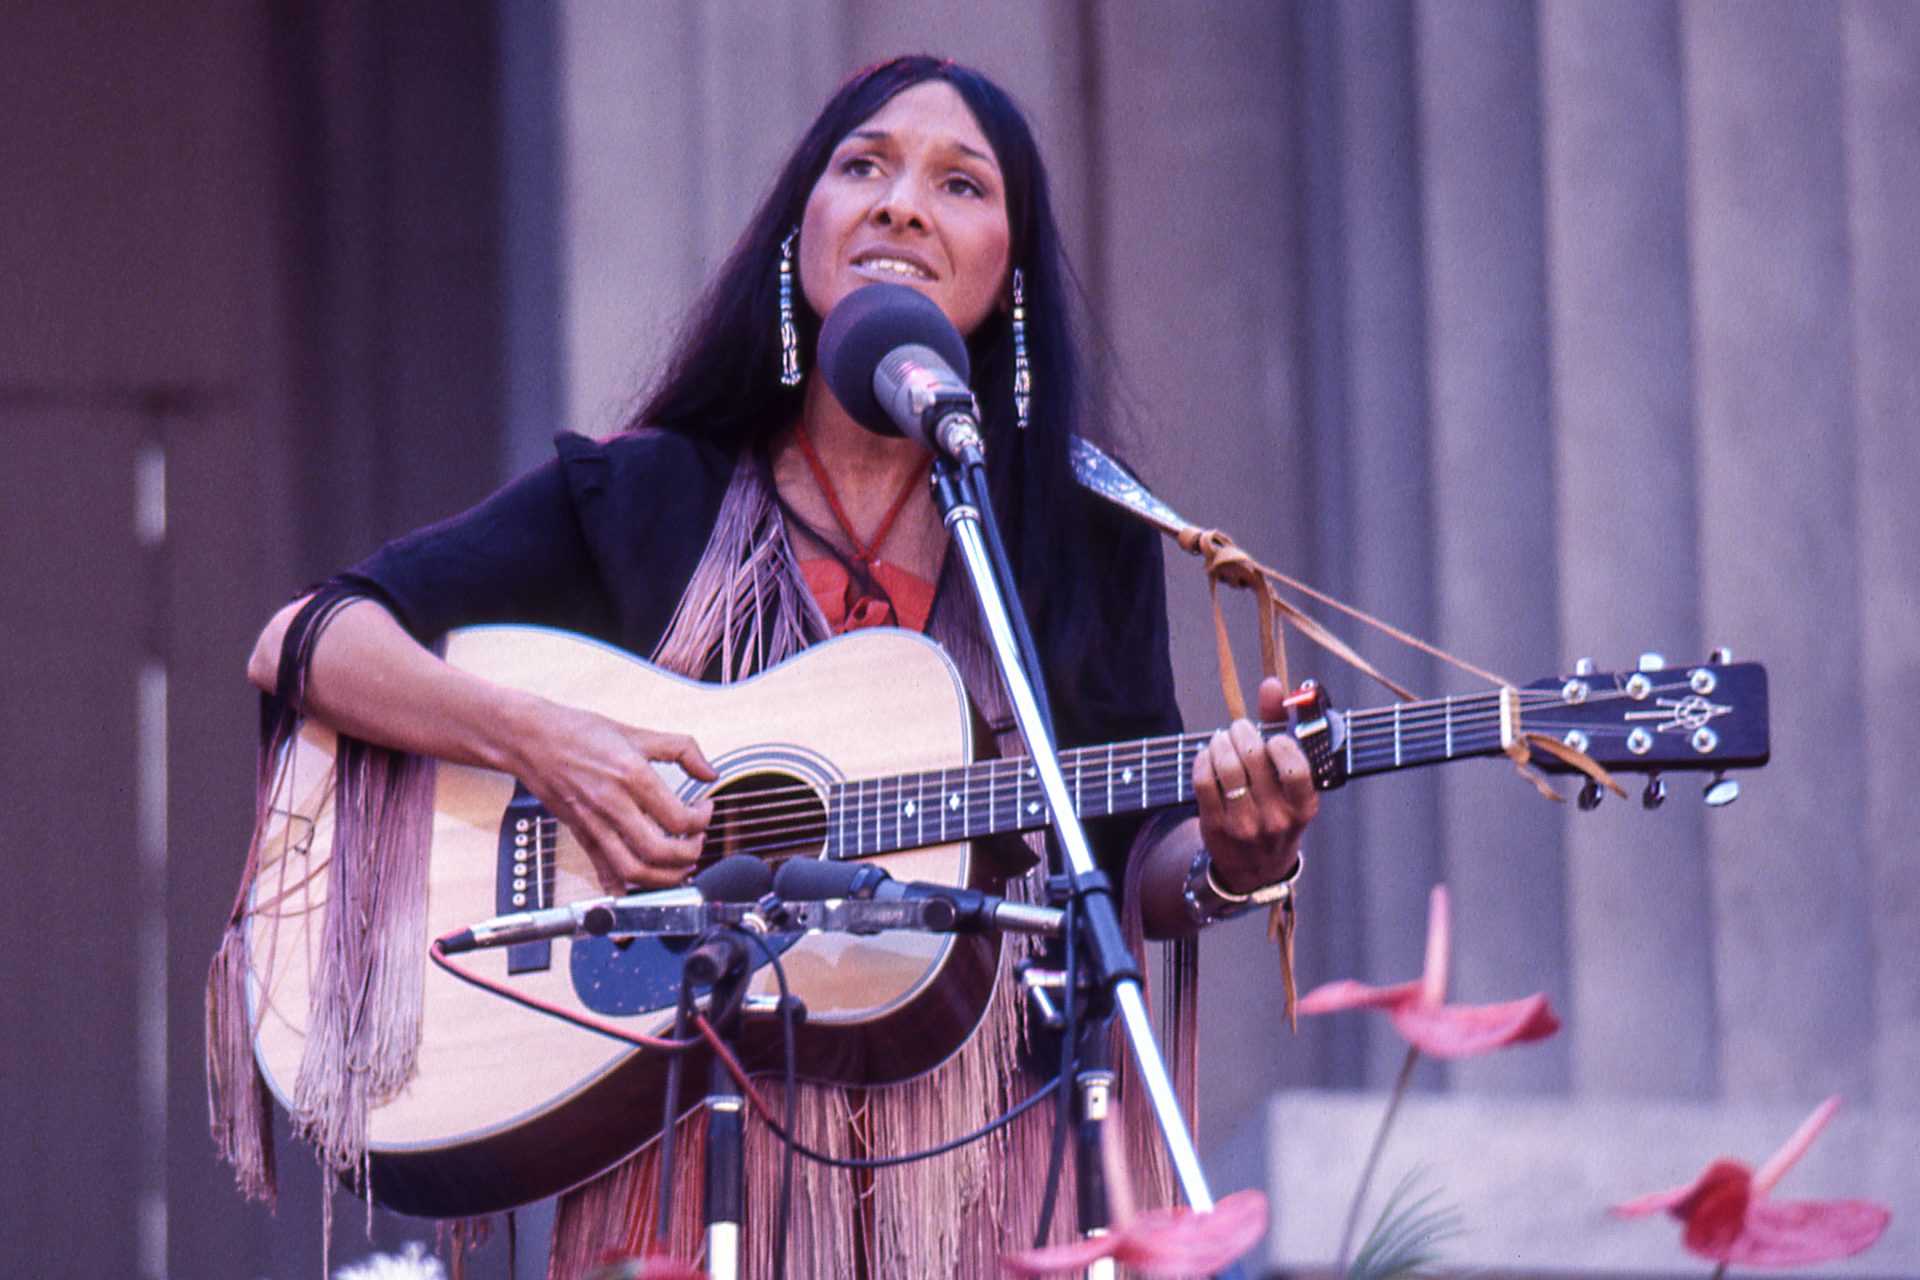 She used her fame to fight for the rights of indigenous people